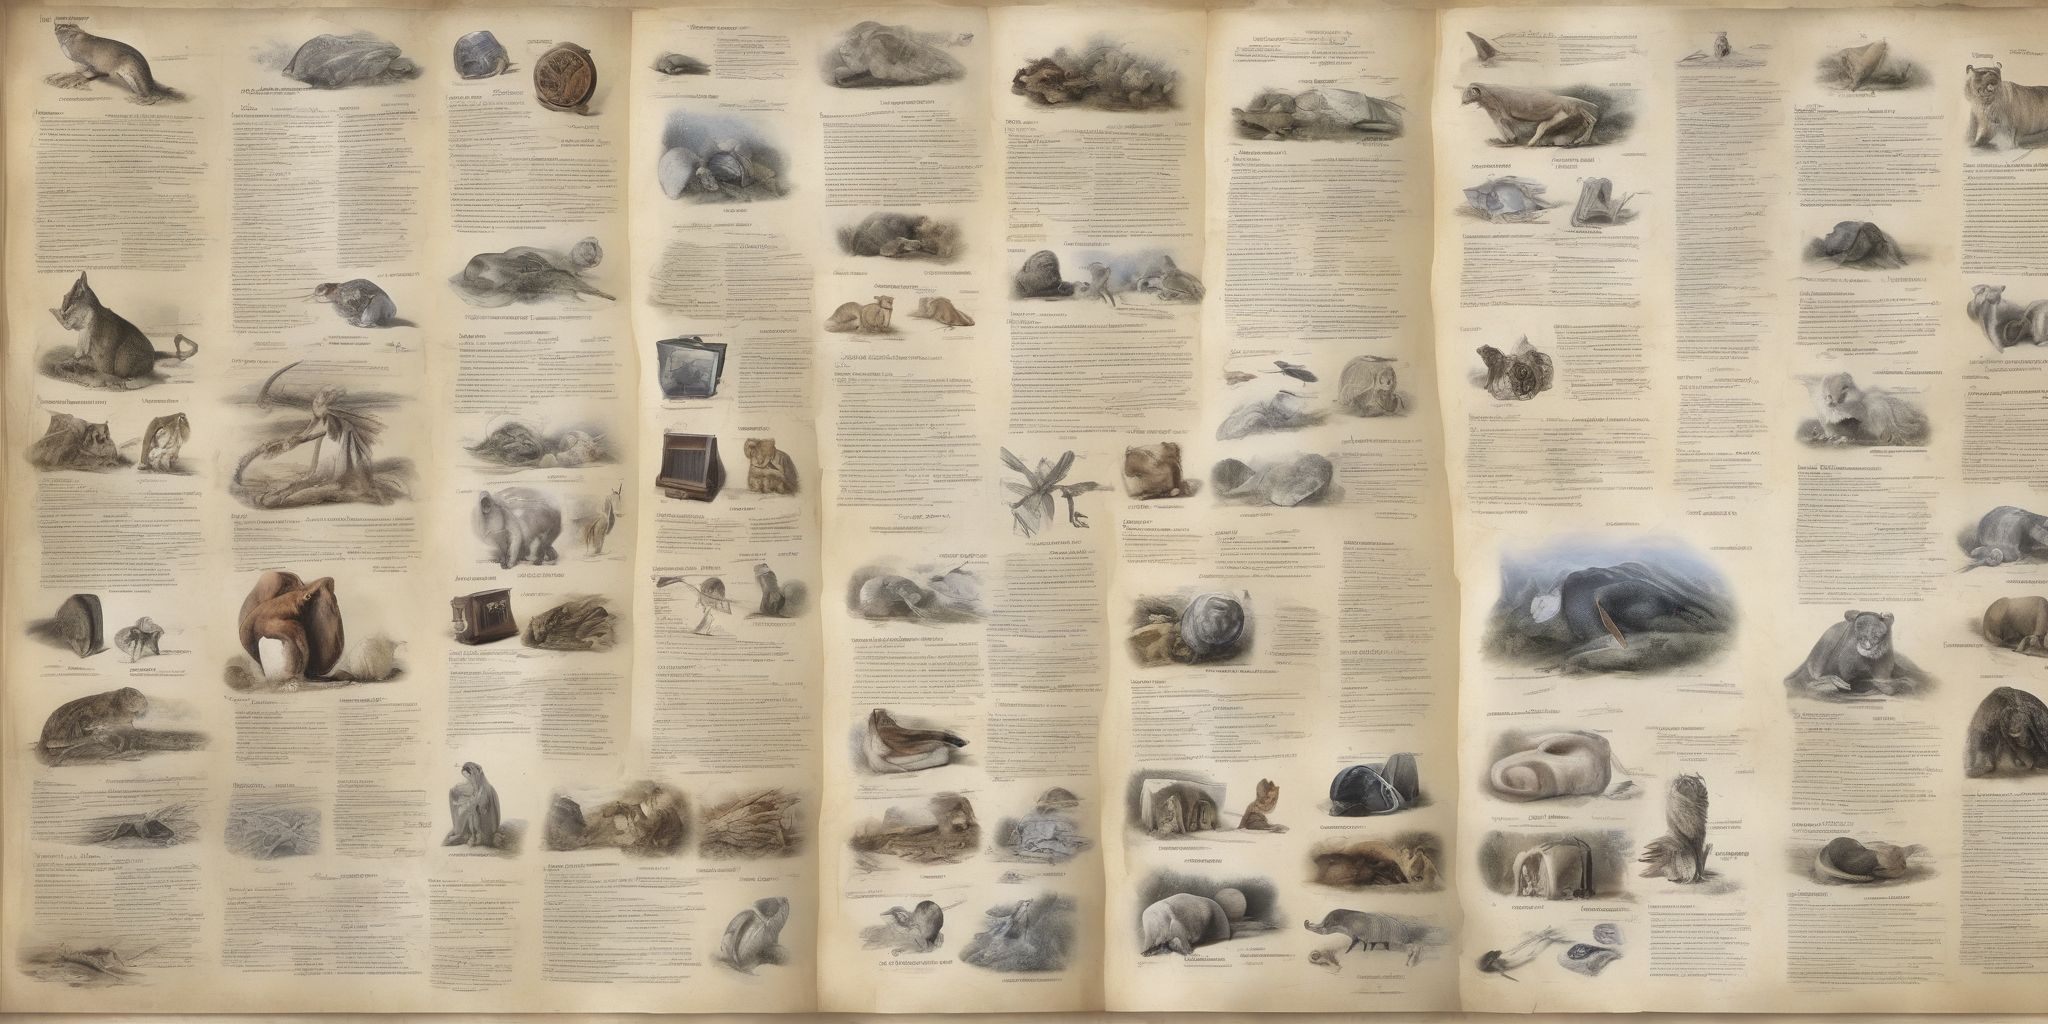 Glossary  in realistic, photographic style